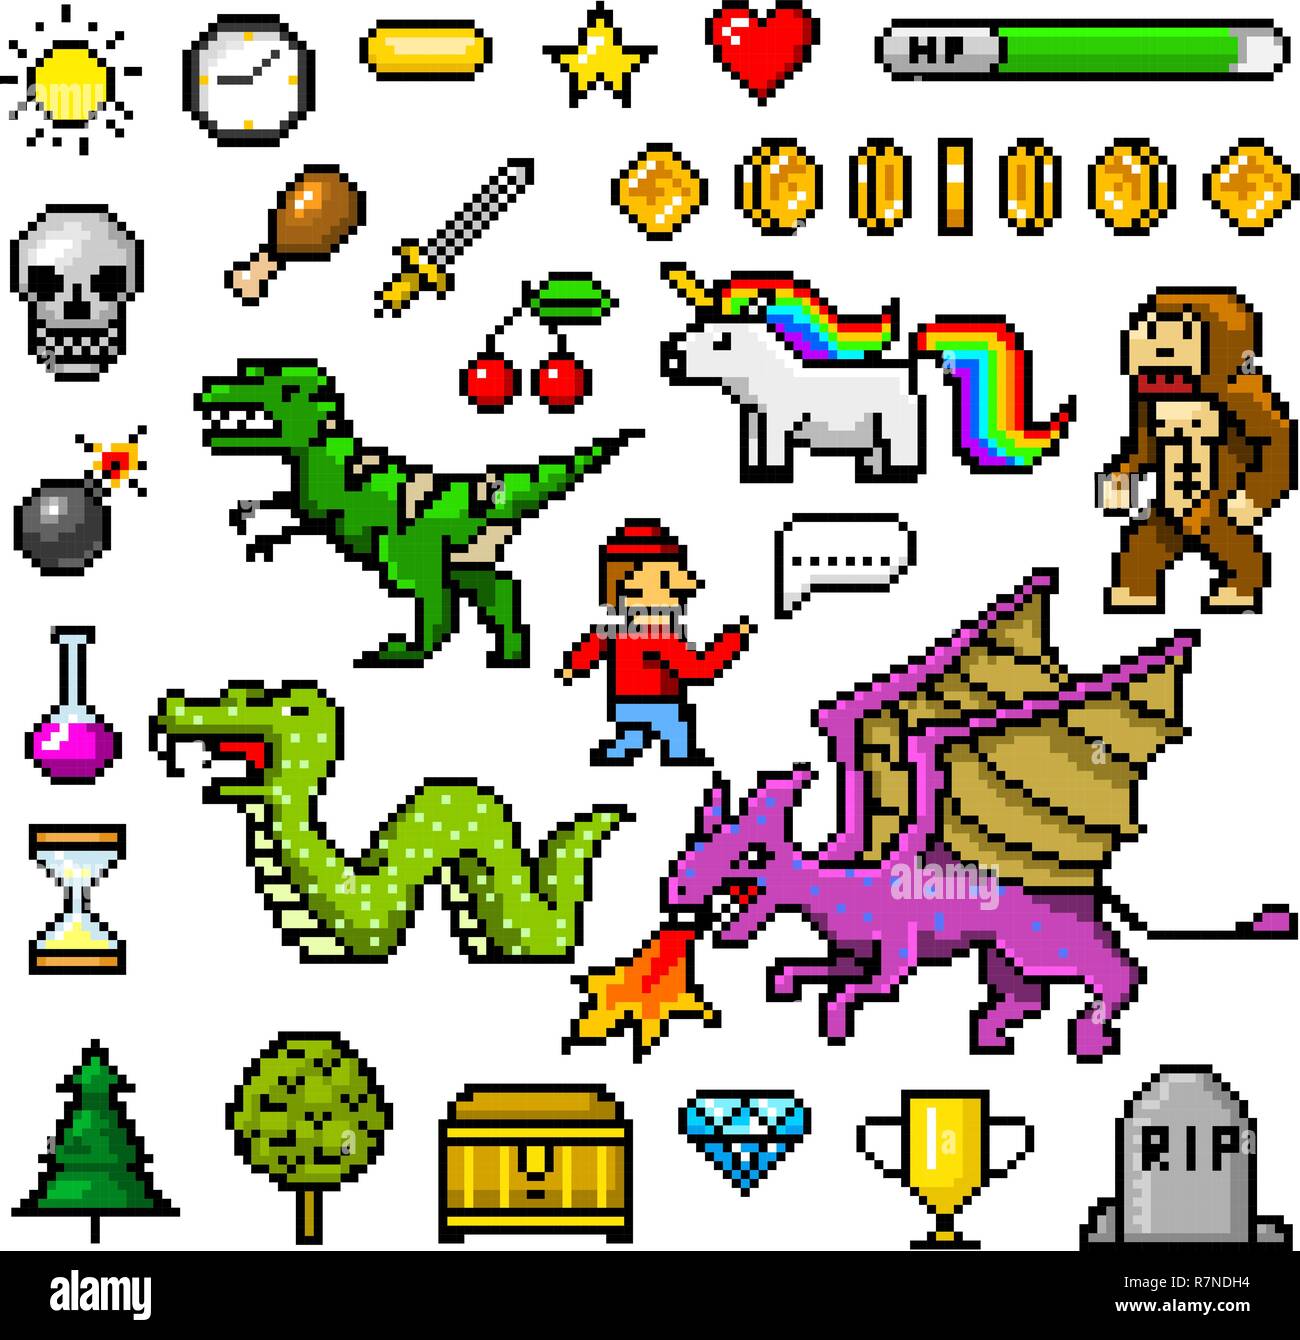 Pixel art 8 bit objects. Retro game assets. Set of icons. vintage computer video arcades. characters dinosaur pony rainbow unicorn snake dragon monkey and coins, Winner's trophy. vector illustration. Stock Vector